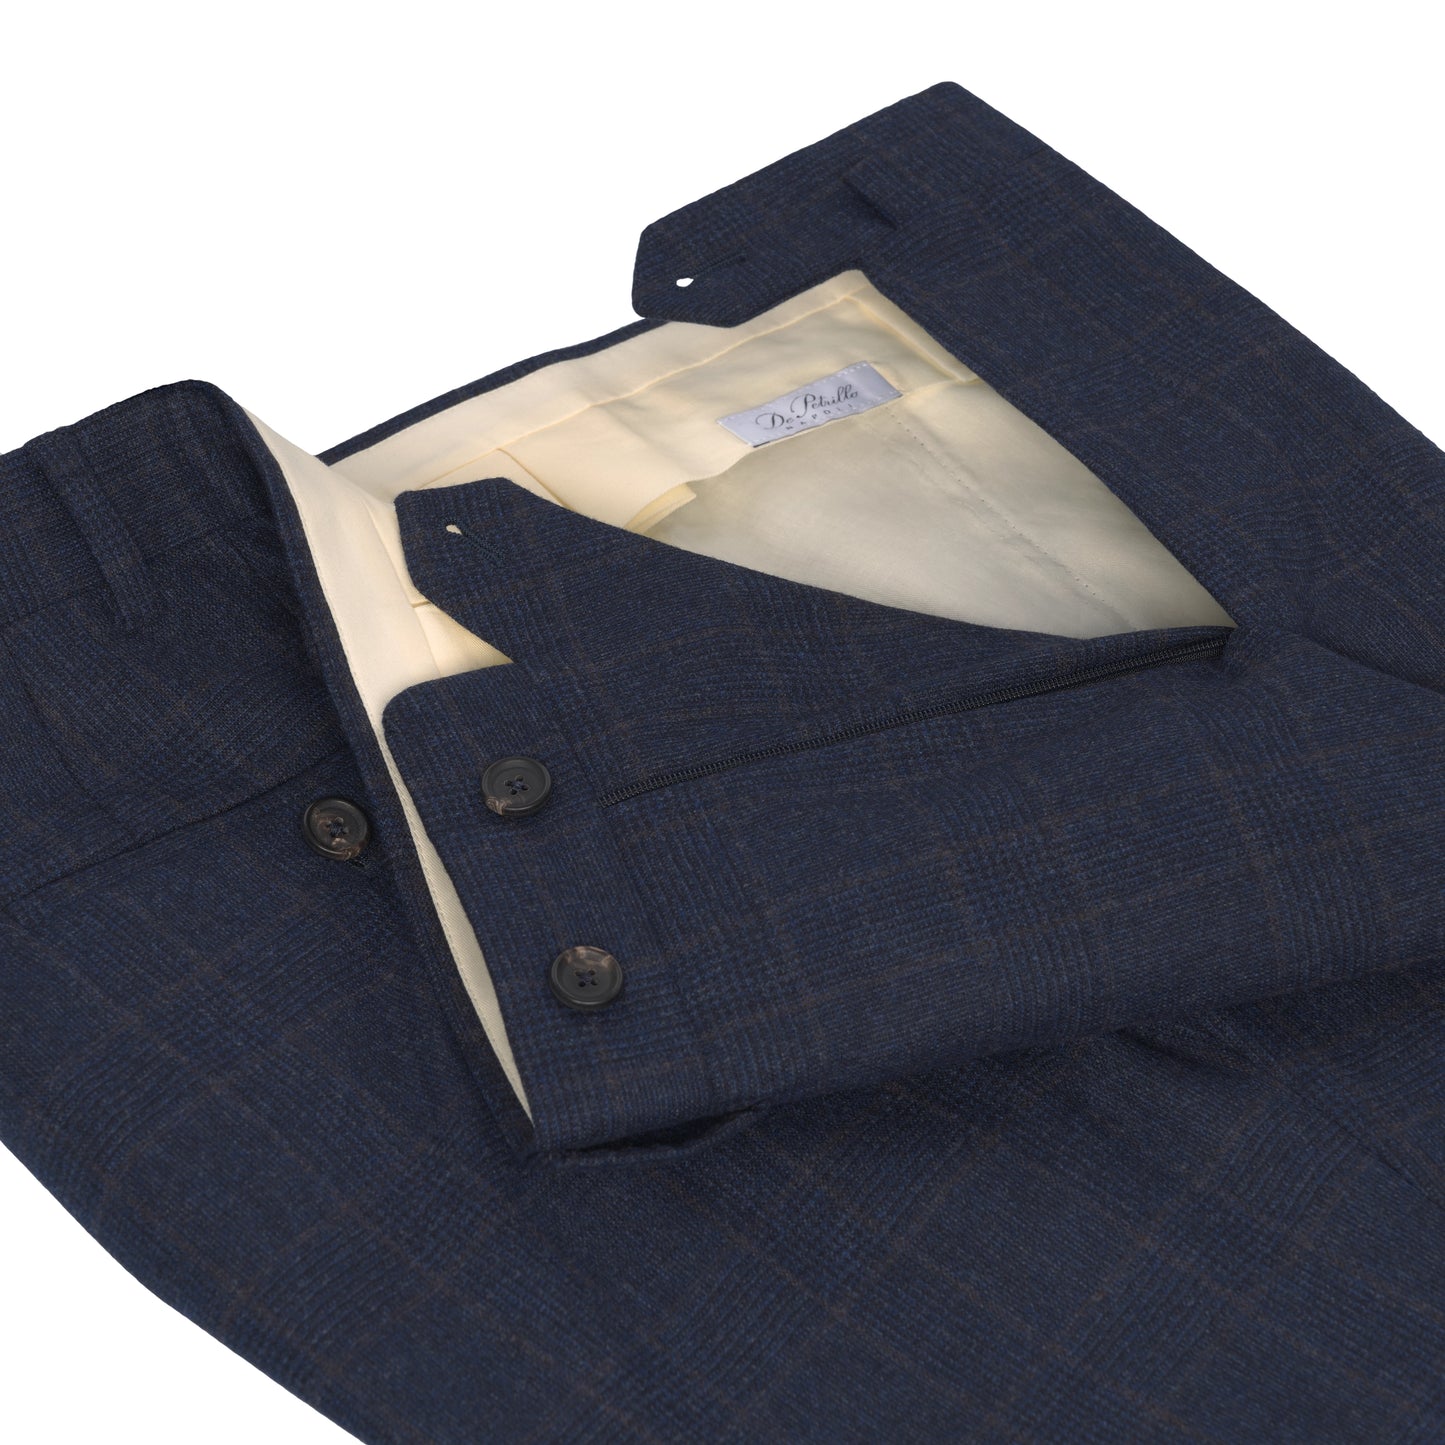 Double-Breasted Checked Wool Suit in Blue and Brown. Exclusively Made for Sartale